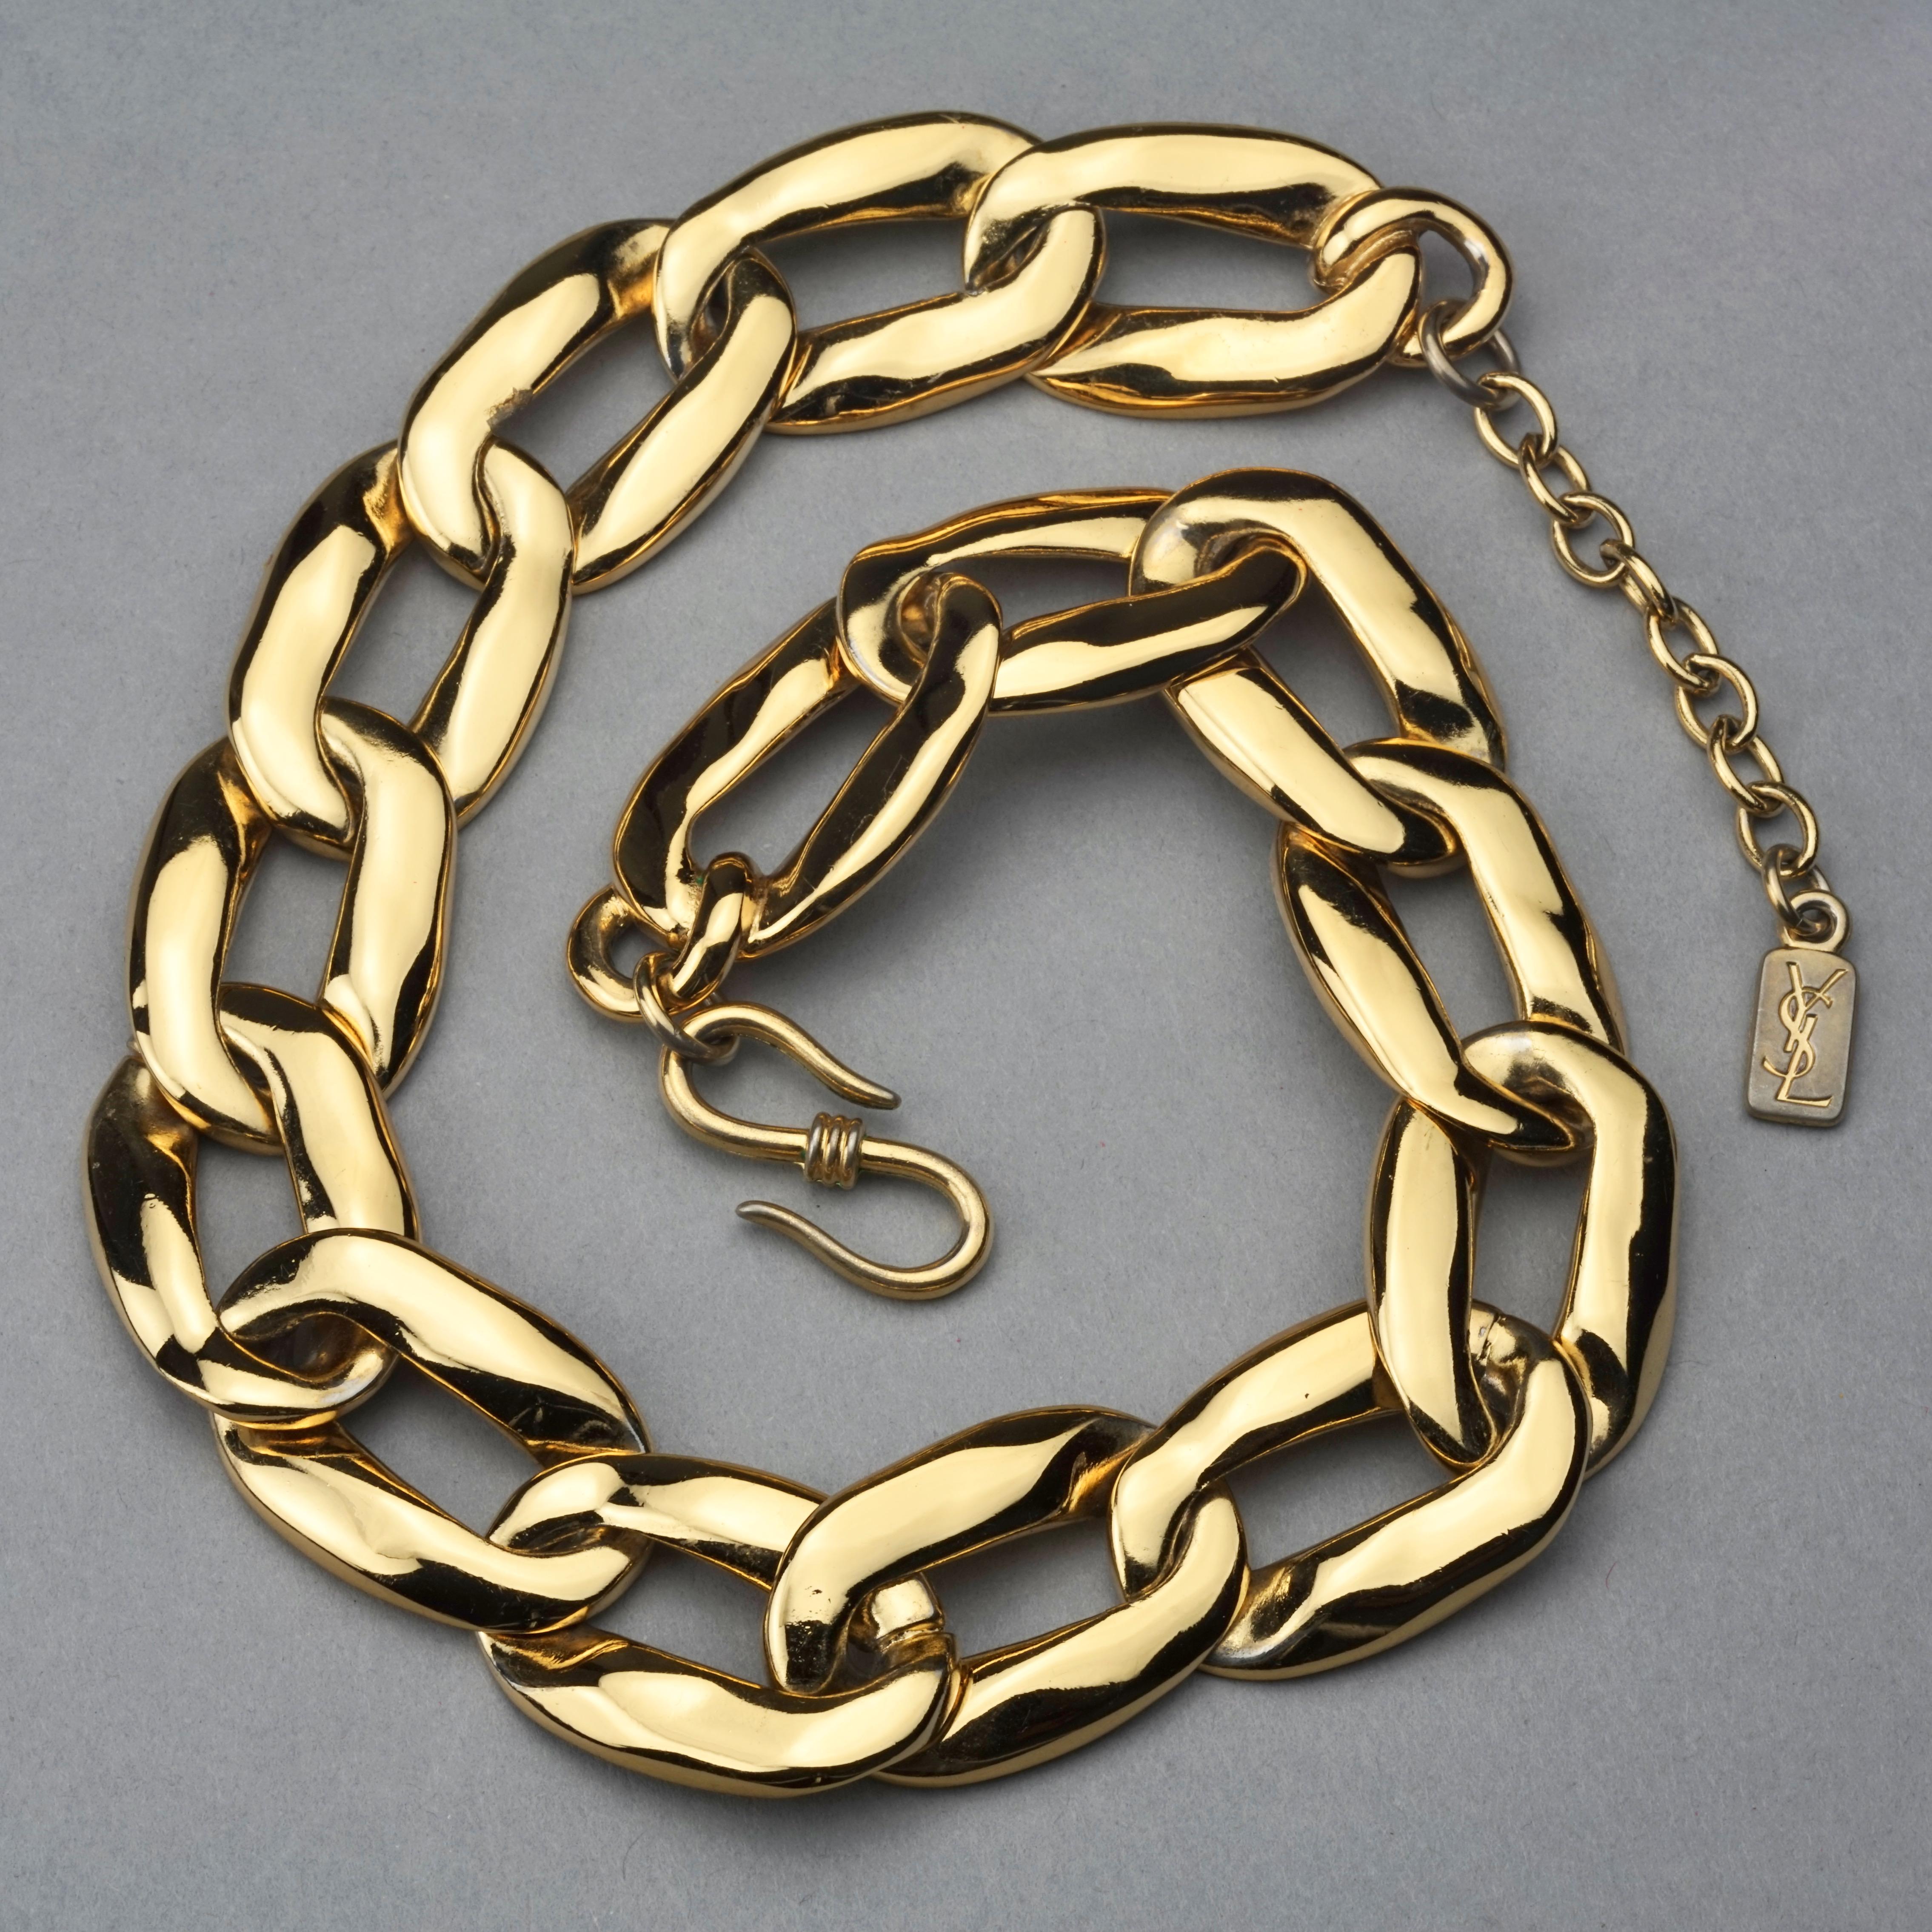 Vintage YVES SAINT LAURENT Ysl by Robert Goossens Chunky Chain Necklace 1